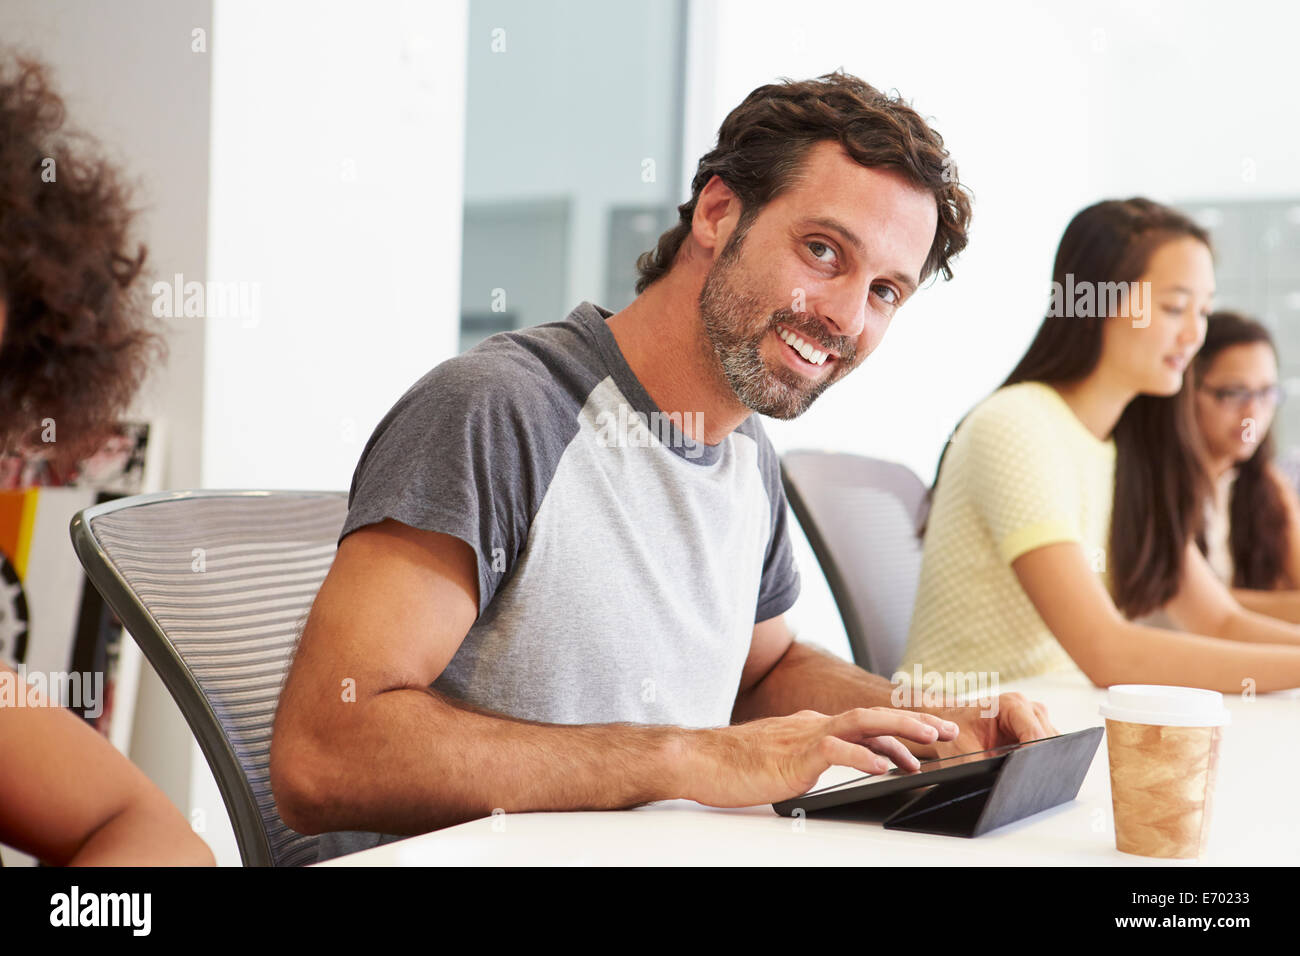 Design Team Collaborating On Project Together Stock Photo